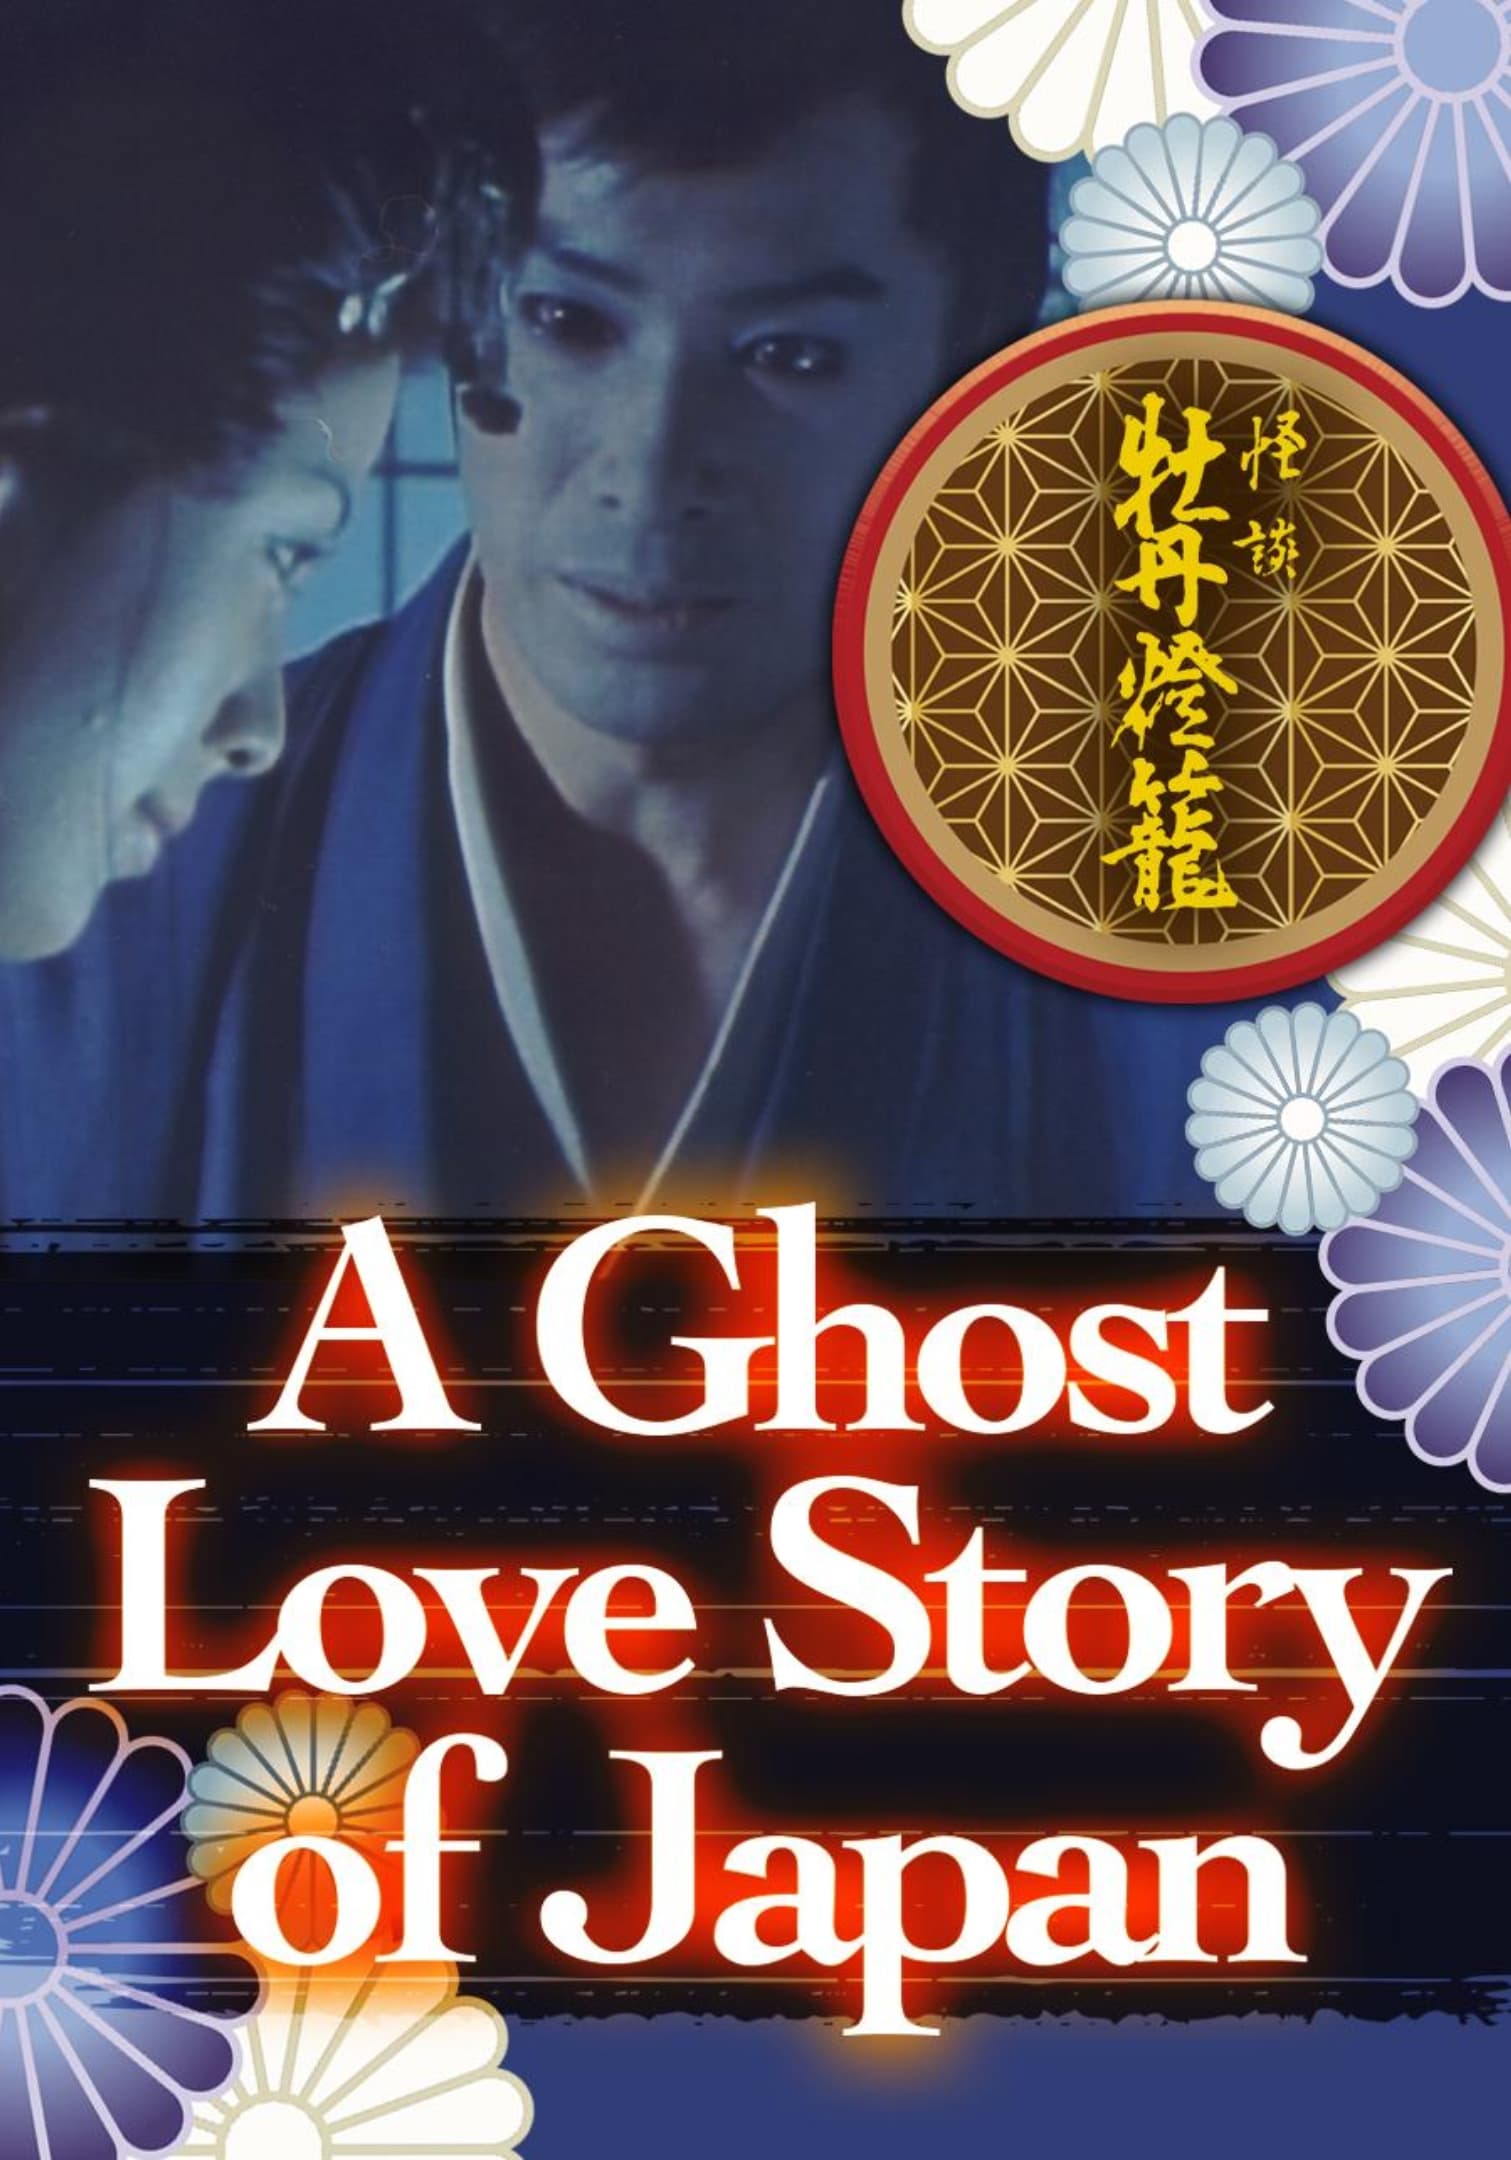 A Ghost Love Story of Japan